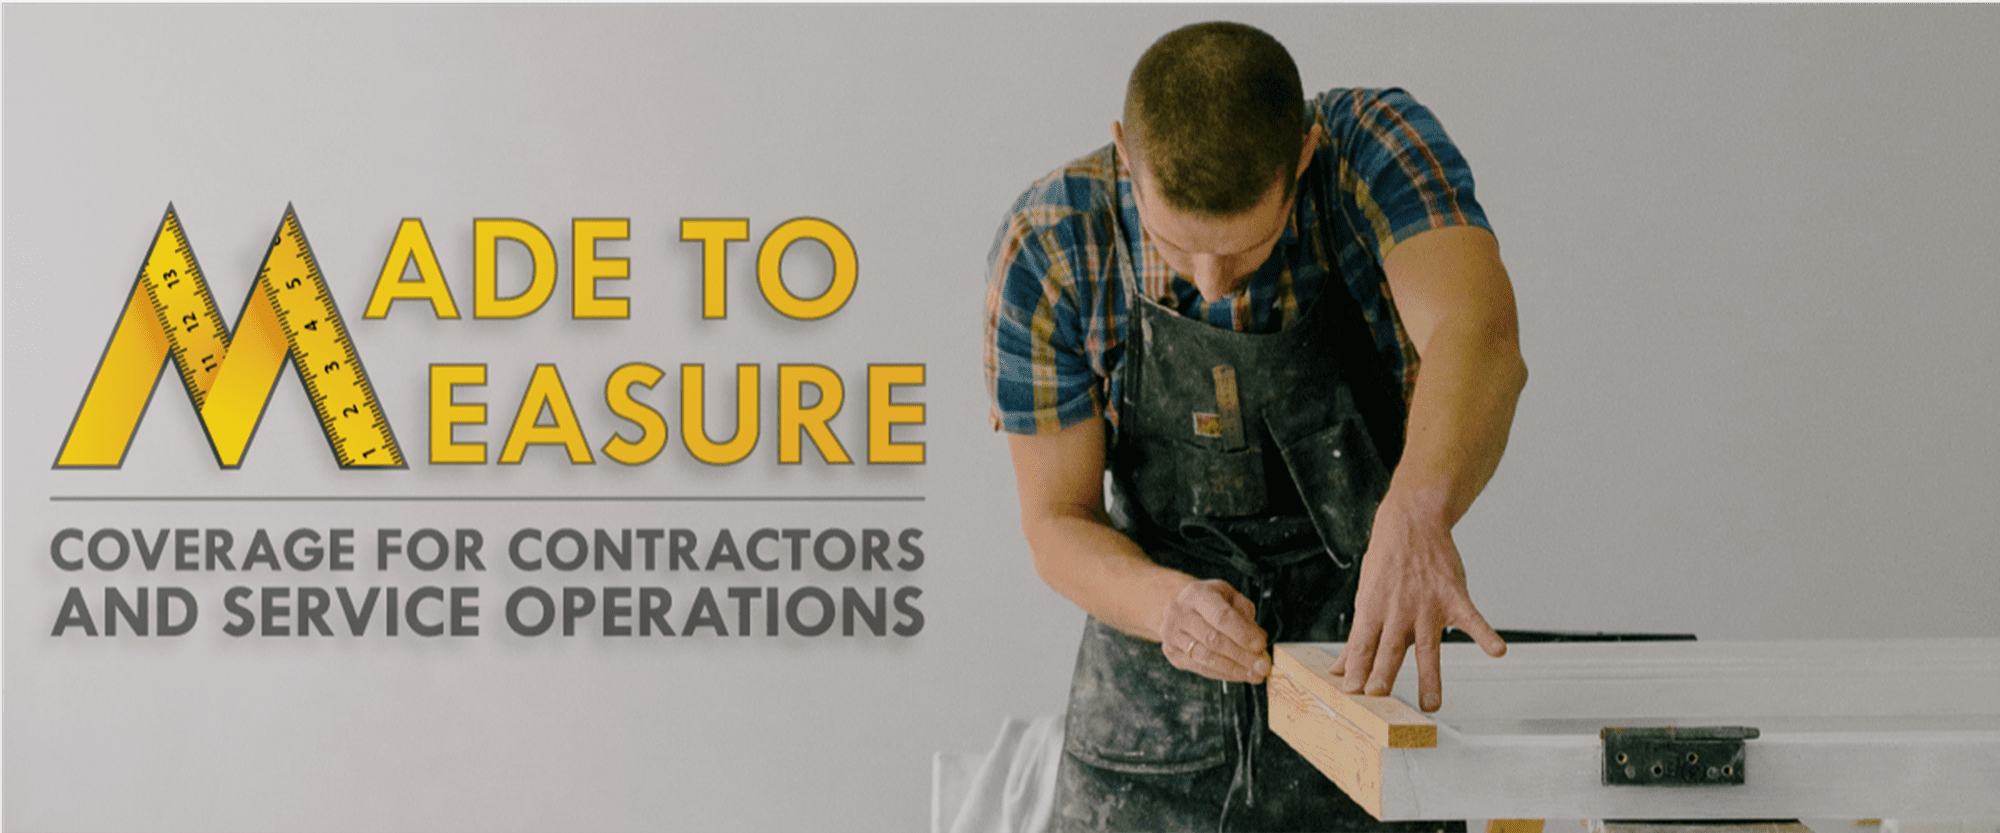 Featured image for “Made to Measure Coverage for Contractors and Service Operations”